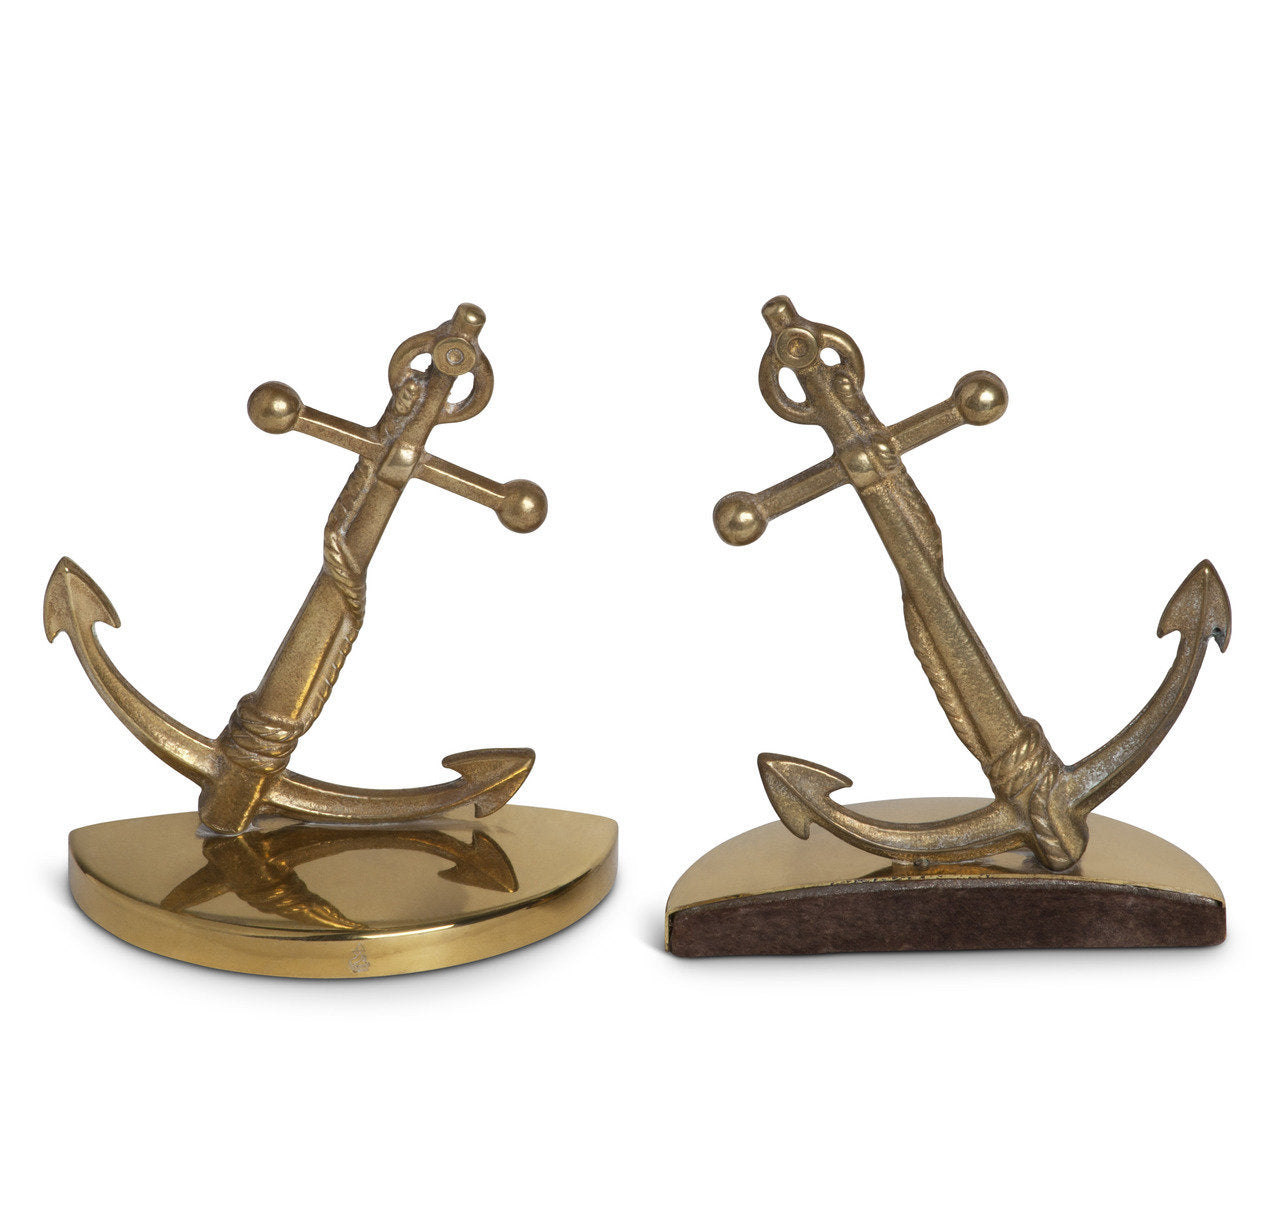 Vintage Nautical Brass Anchor Bookends